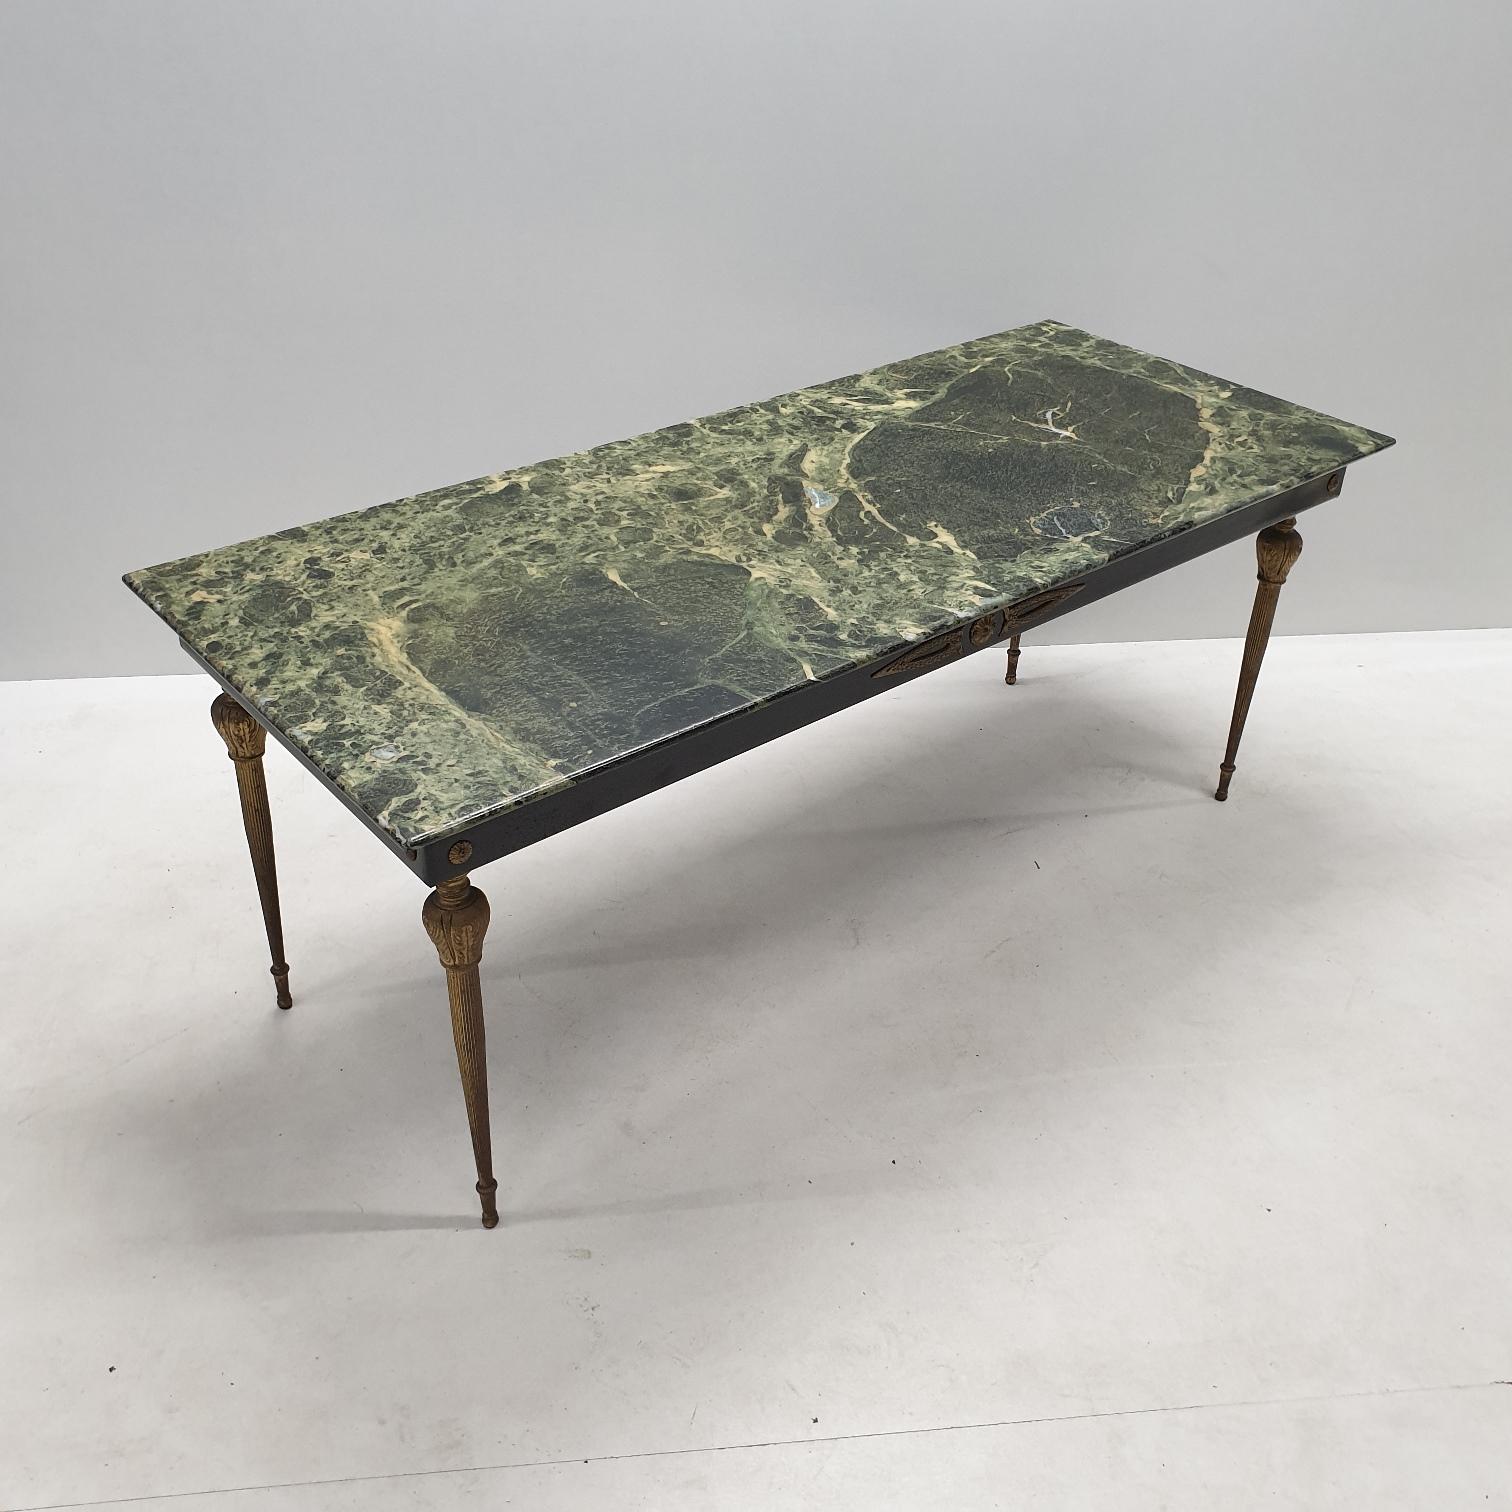 Vintage Brass Coffee Table with a Green Marble Top, 1950s For Sale 4